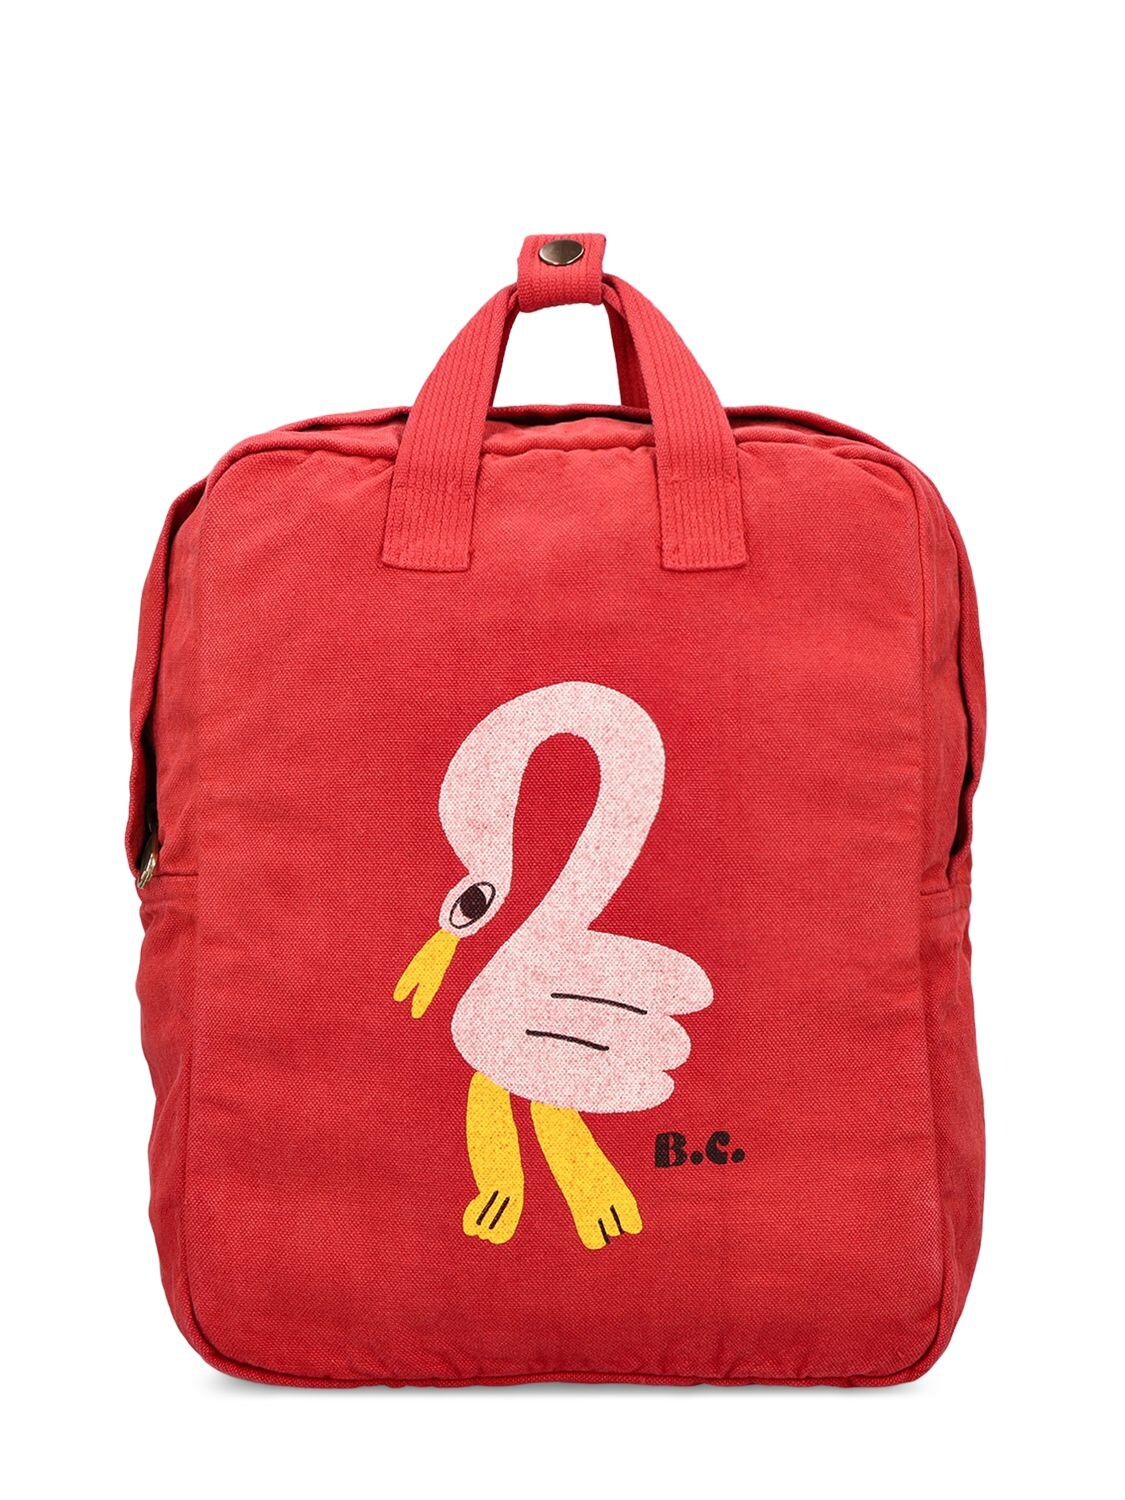 BOBO CHOSES RUBBER PRINT COTTON CANVAS BACKPACK